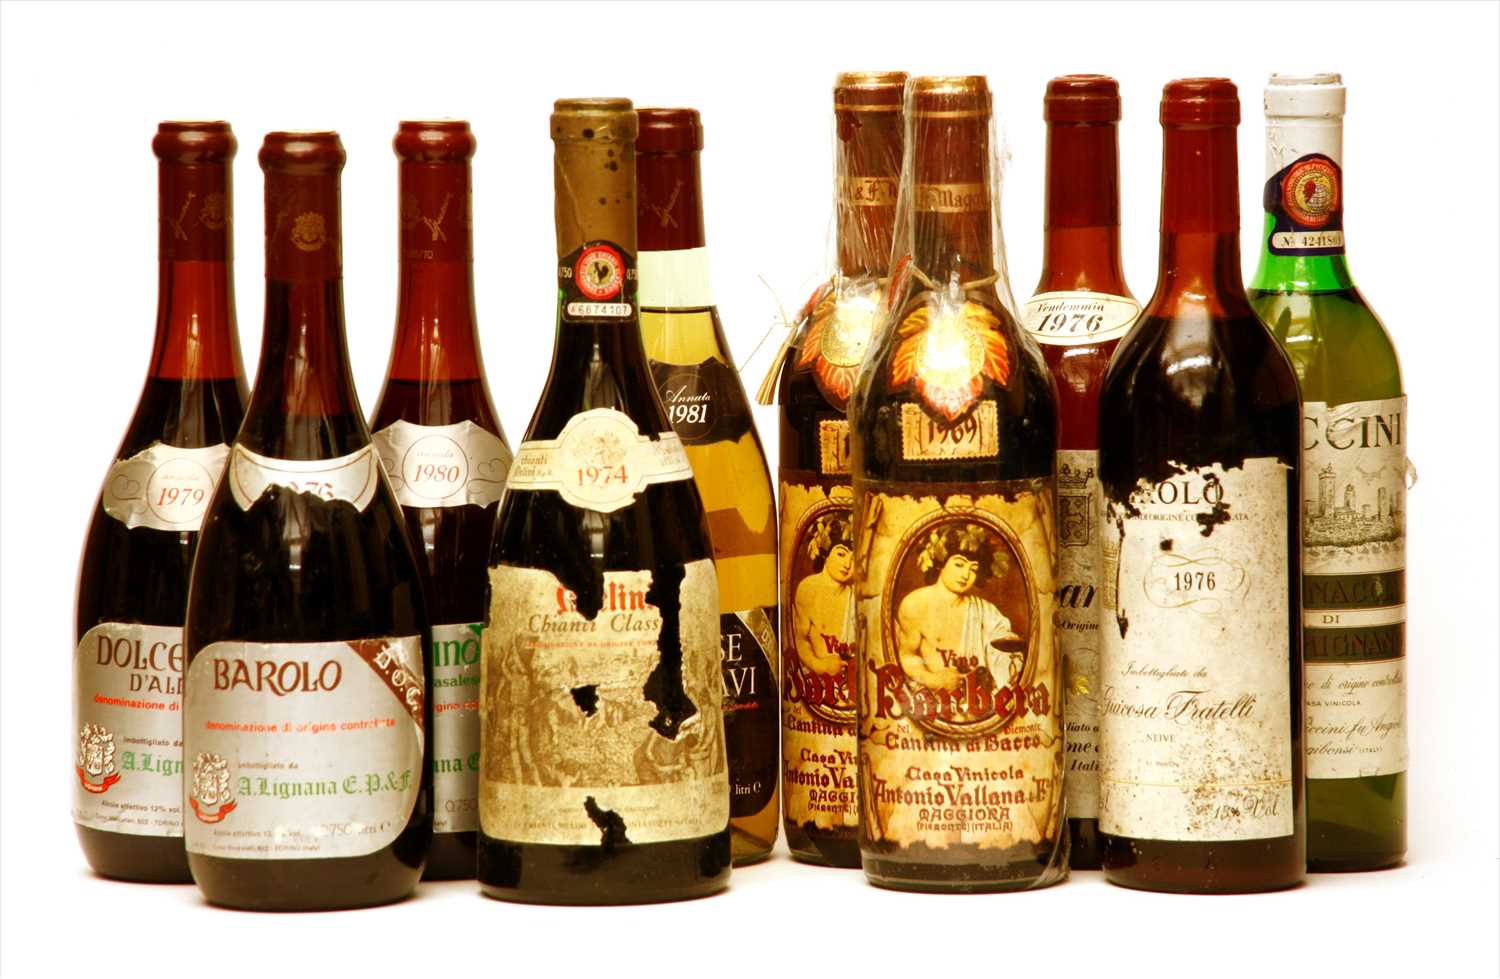 Lot 107 - Assorted Italian Wines: A. Lignana, 1976, 1979 and 1980 plus others, 10 bottles in total